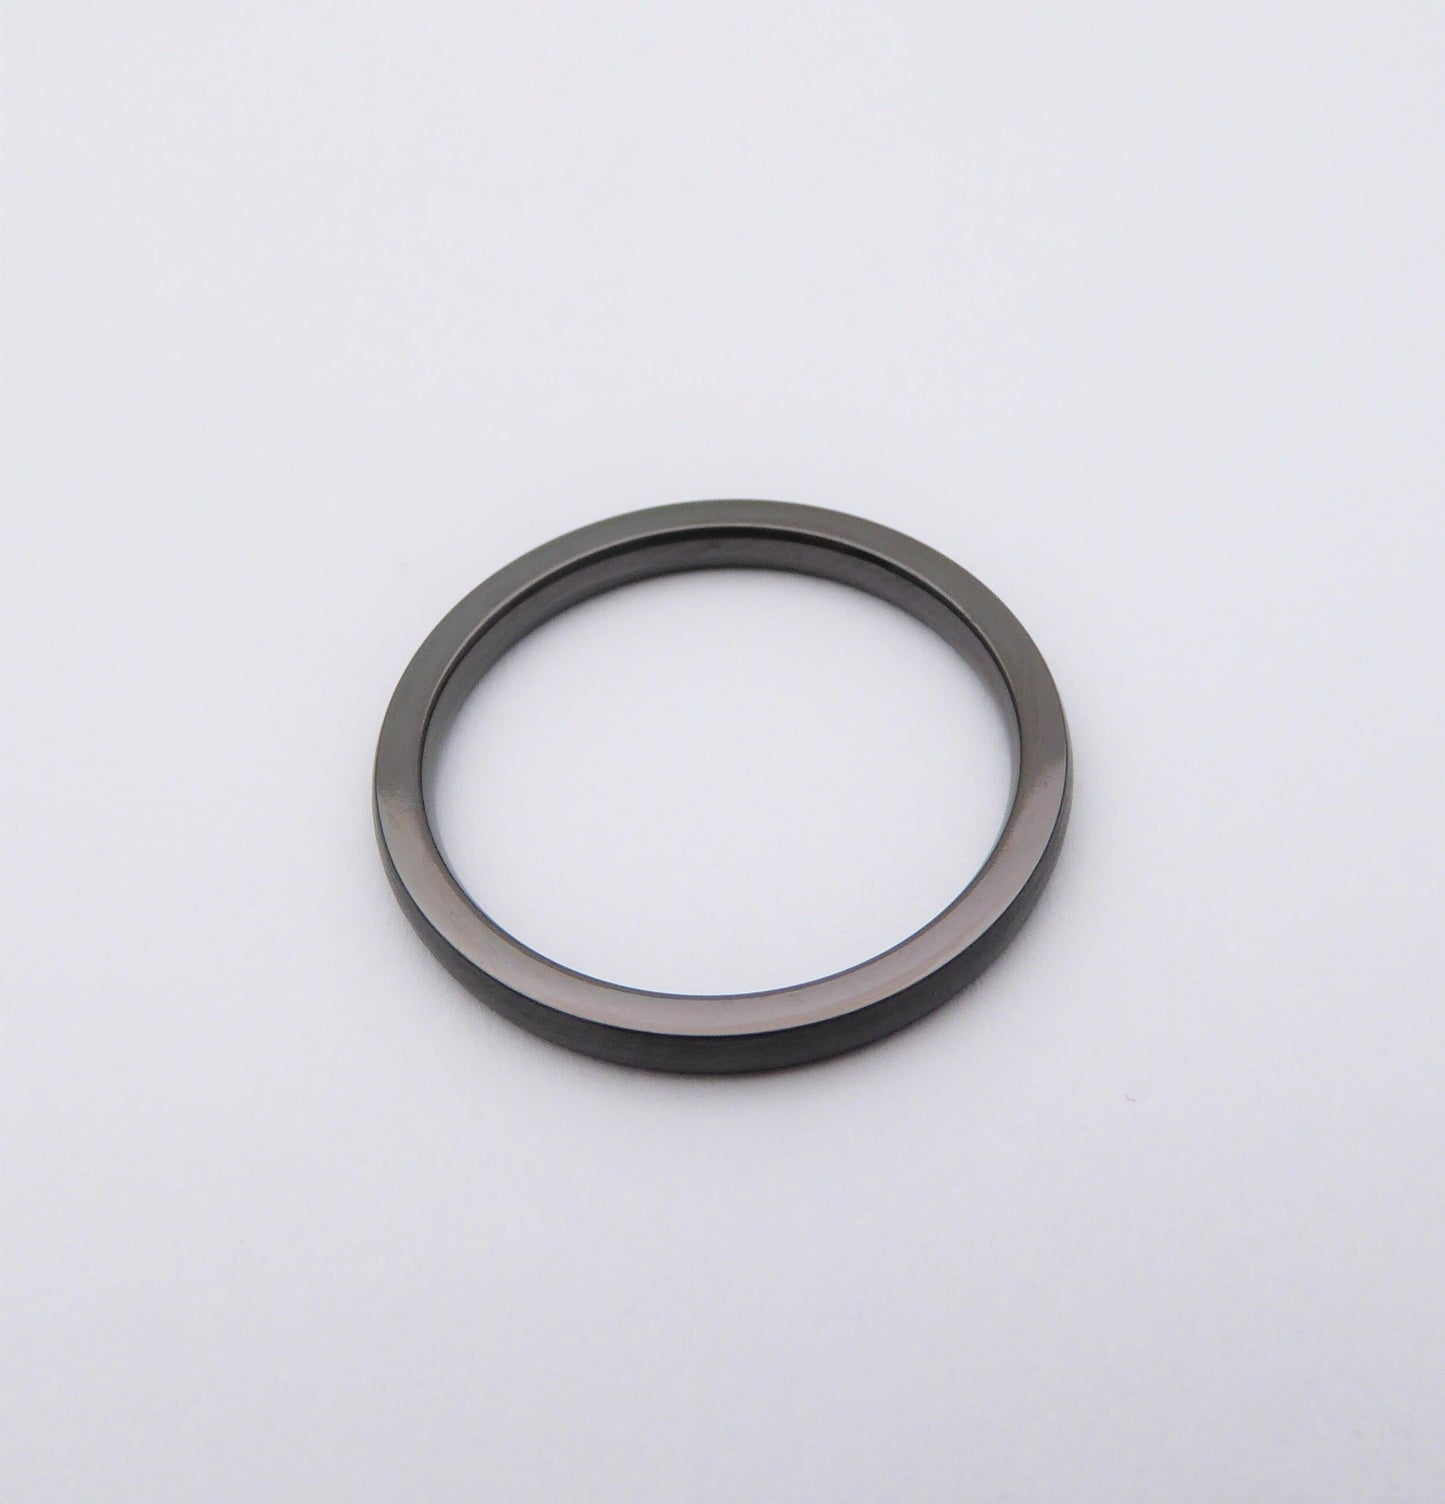 2mm Black Zirconium with matte brushed finish - wedding ring band for men and women